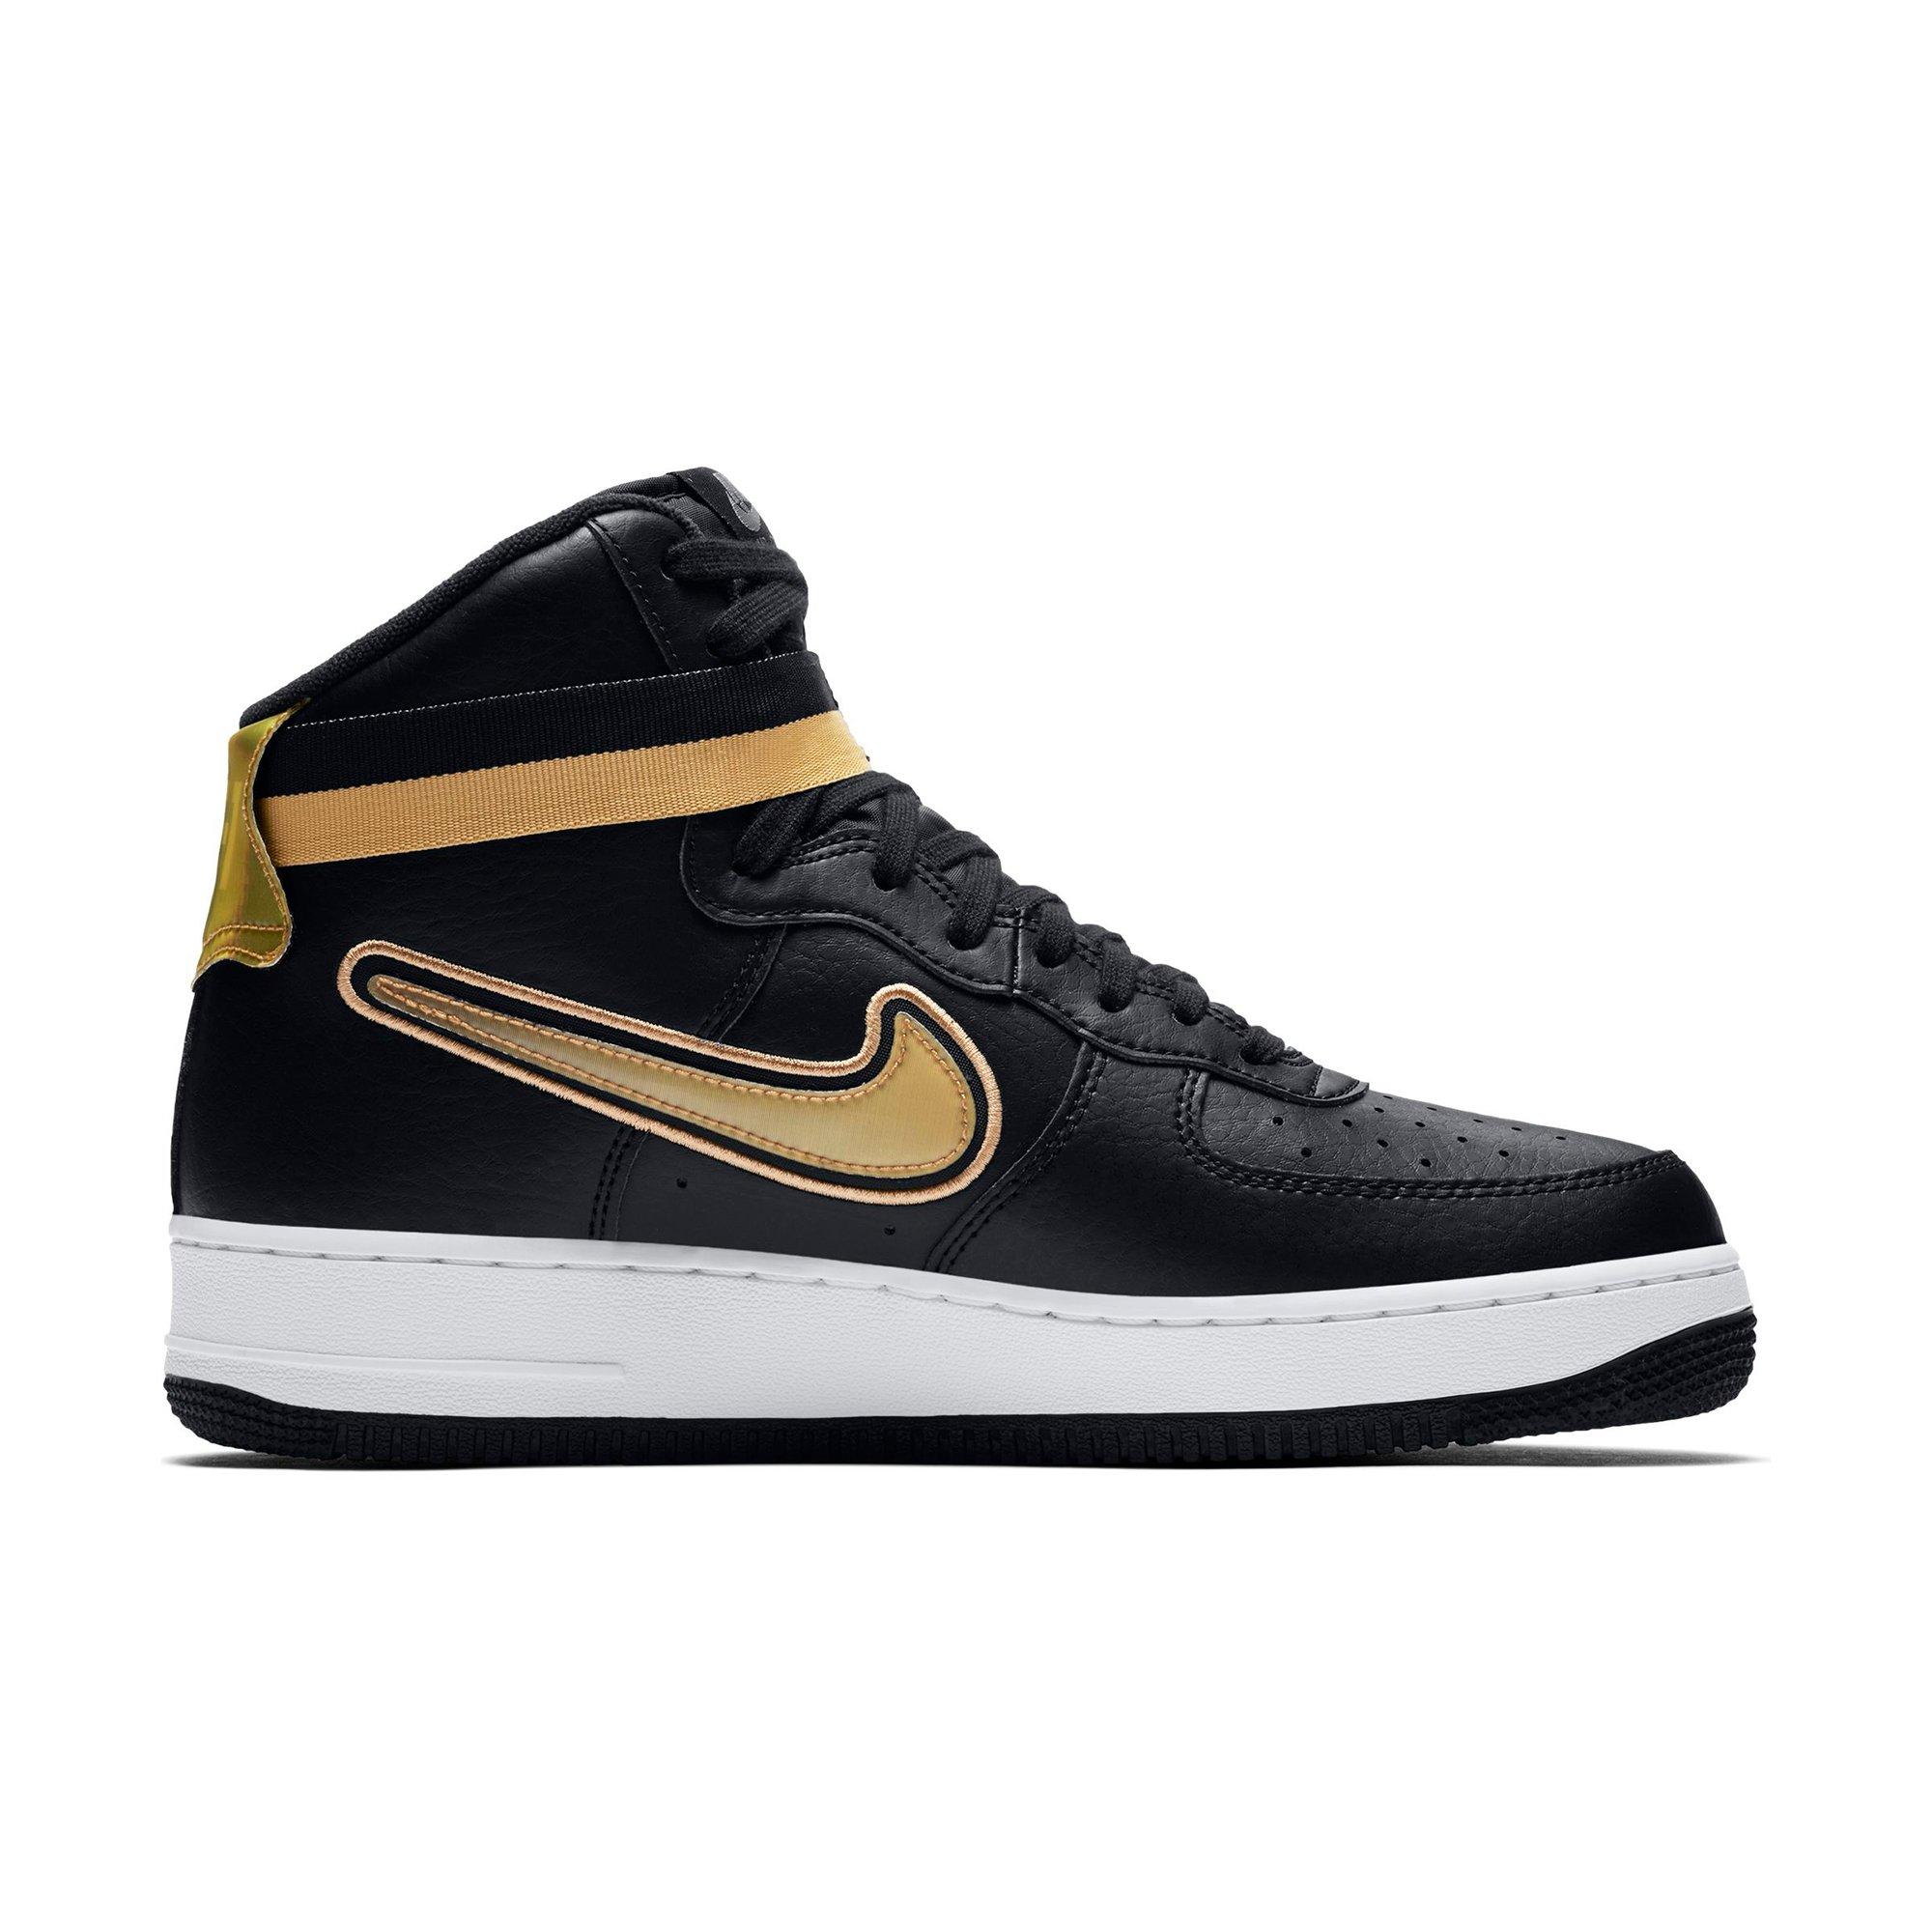 black and gold high top nikes